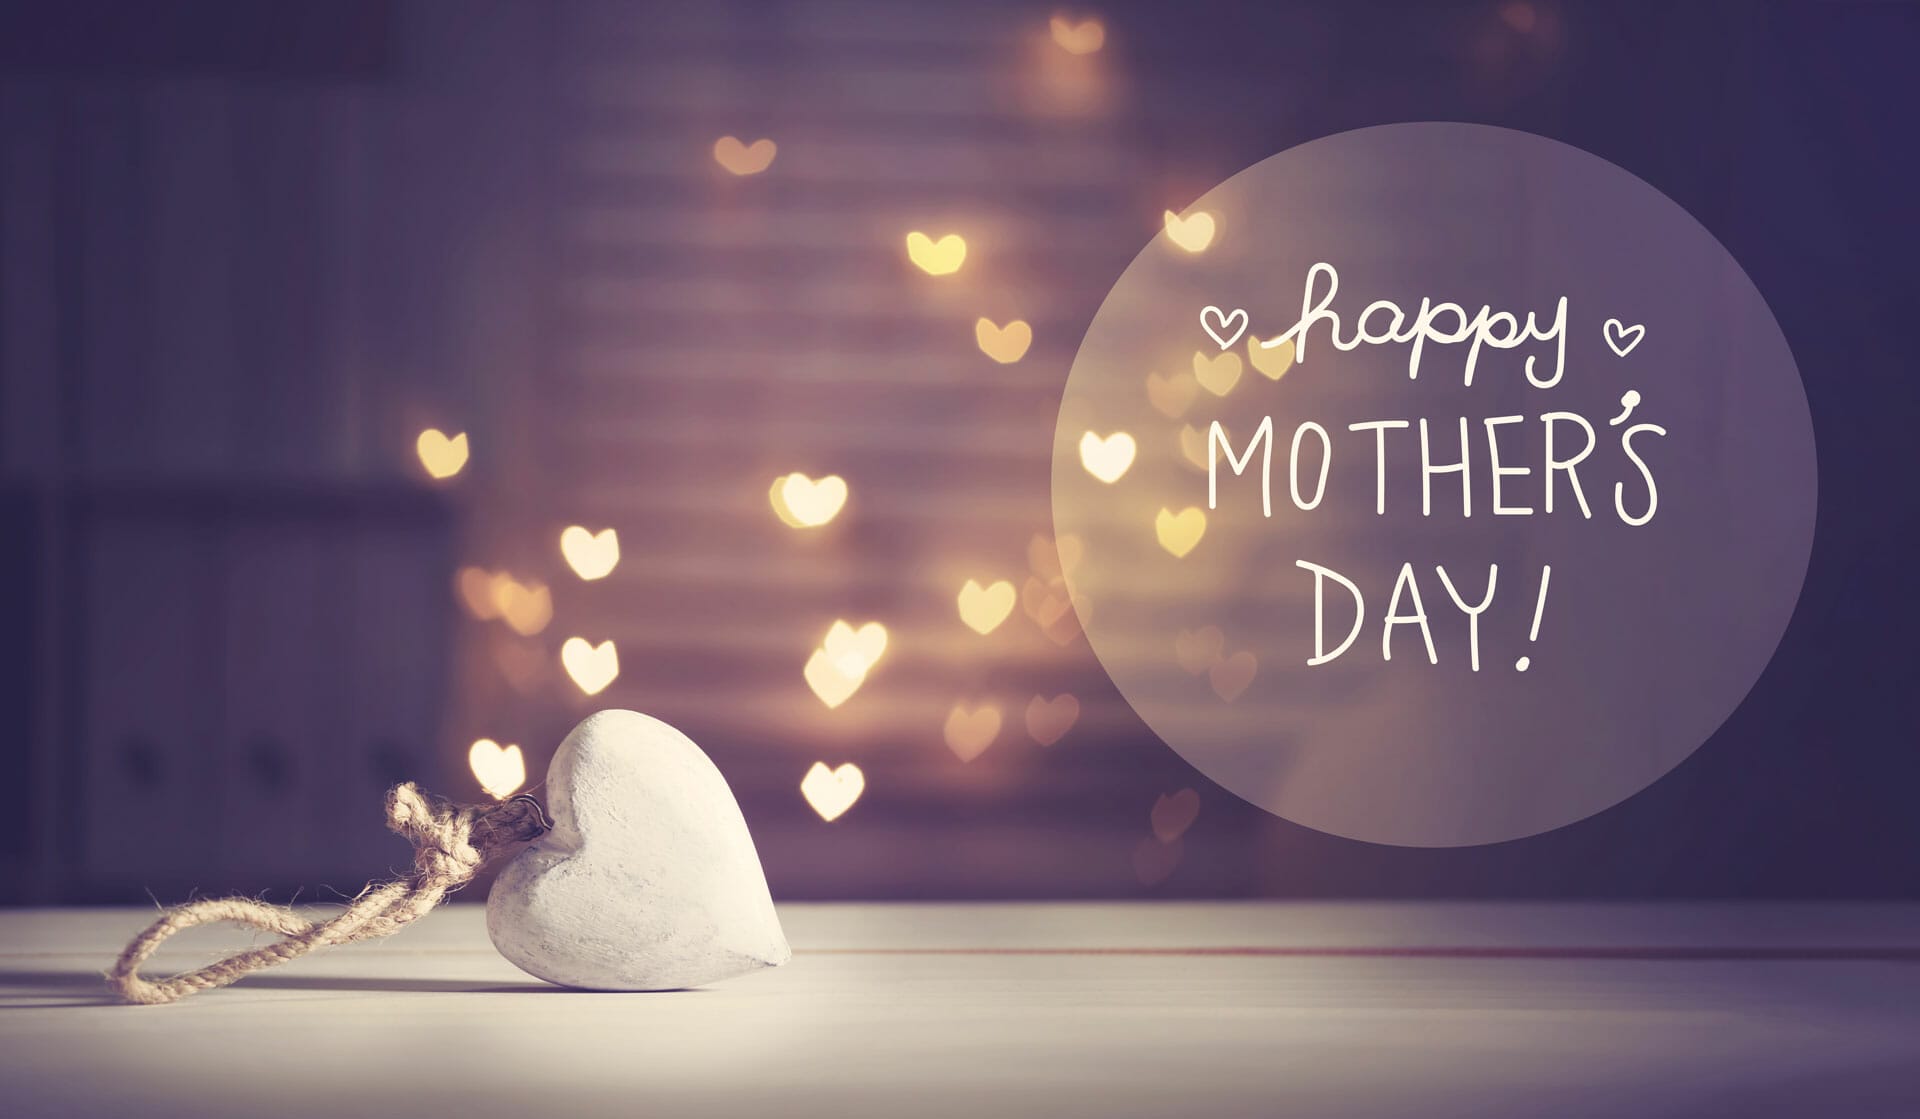 Happy Mothers Day on purple background